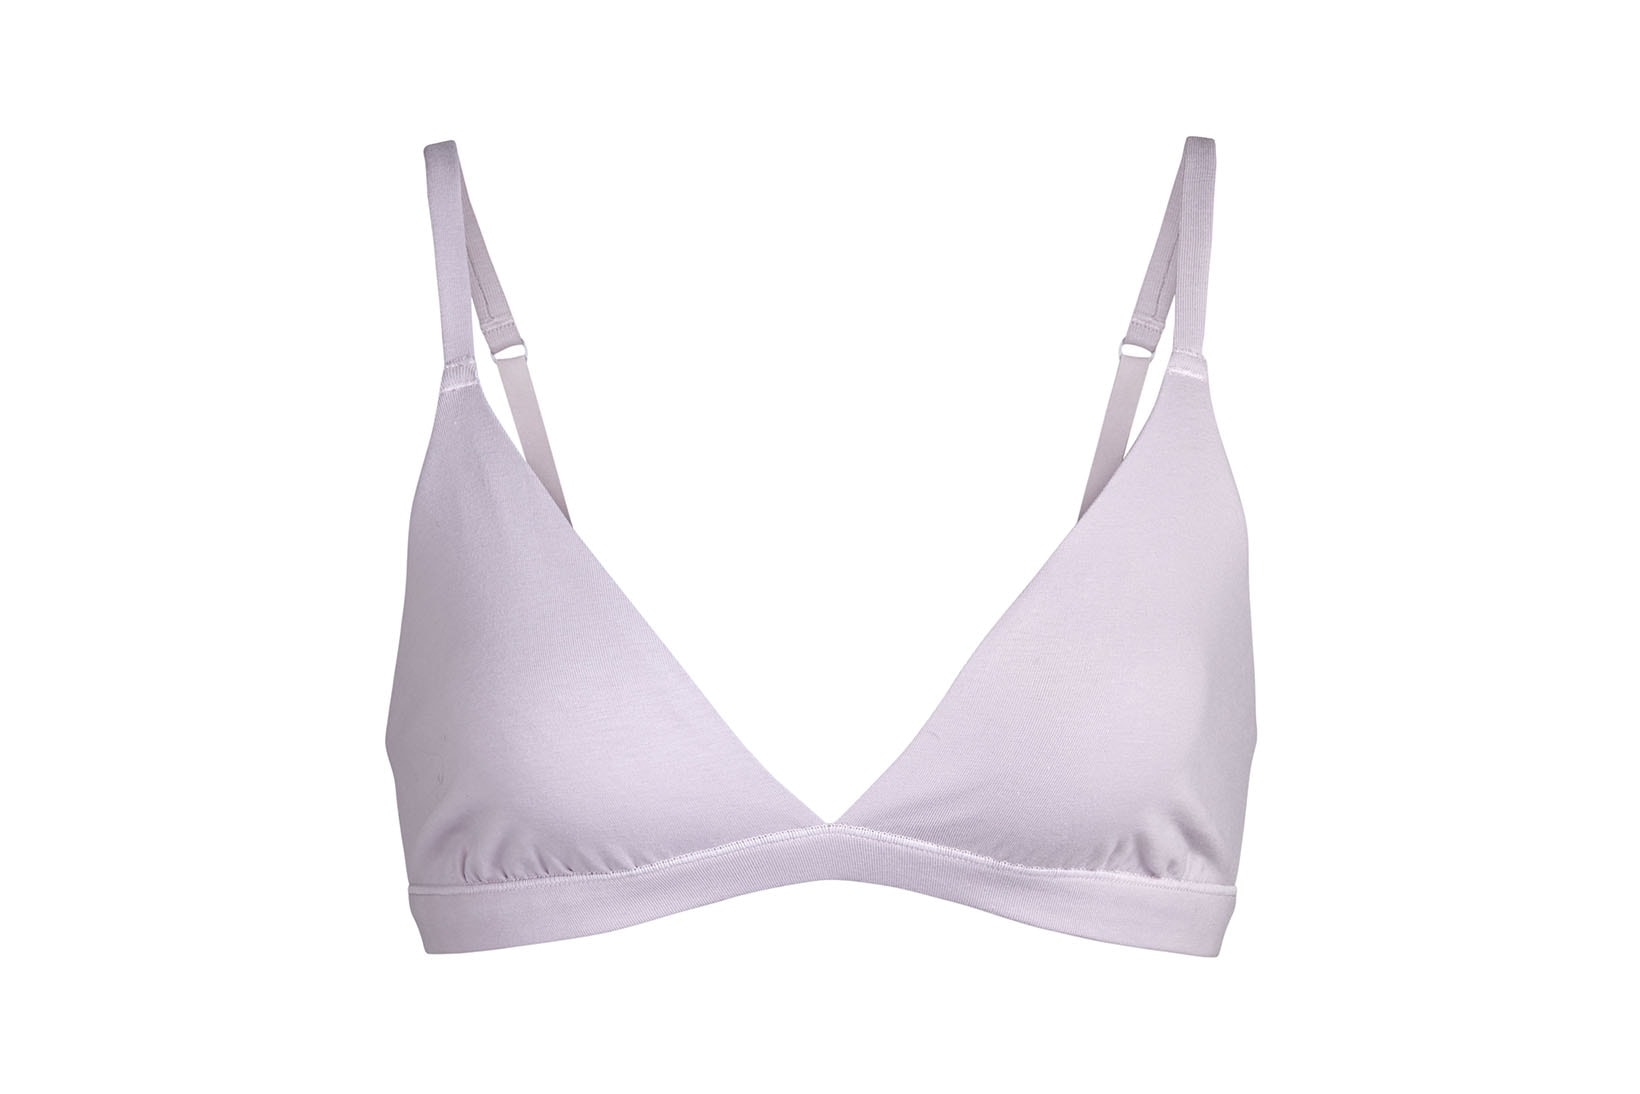 SKIMS on X: The Cotton Triangle Bralette ($32) is designed with a